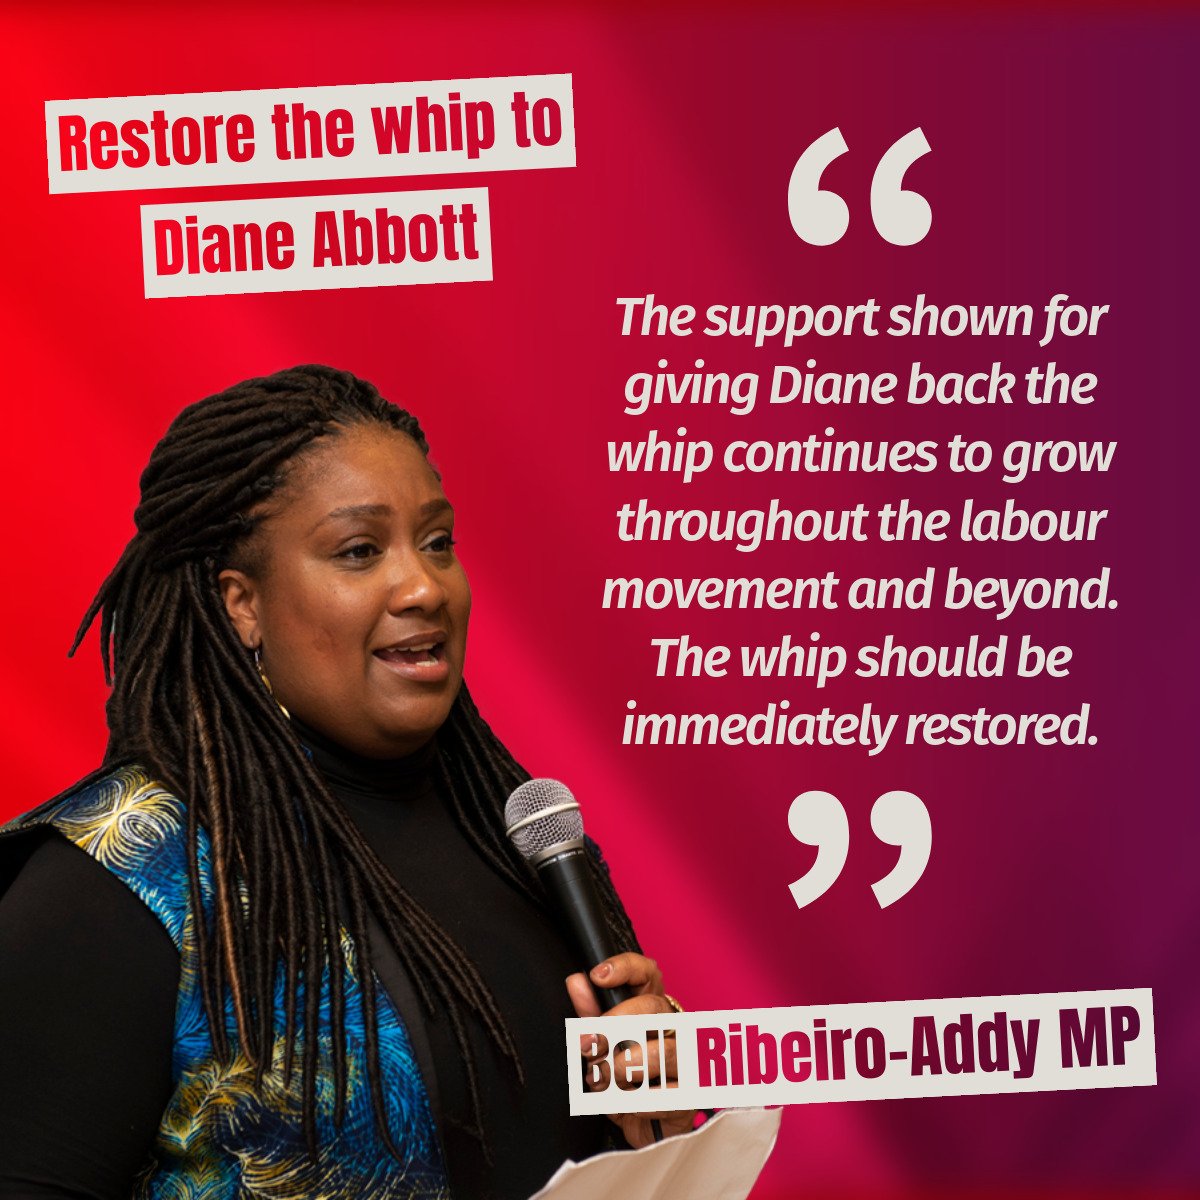 MP For Streatham @BellRibeiroAddy on the growing momentum behind the #RestoreTheWhip campaign in support of @HackneyAbbott- you can join more than 12,000 people in signing the petition here: actionnetwork.org/petitions/rest…